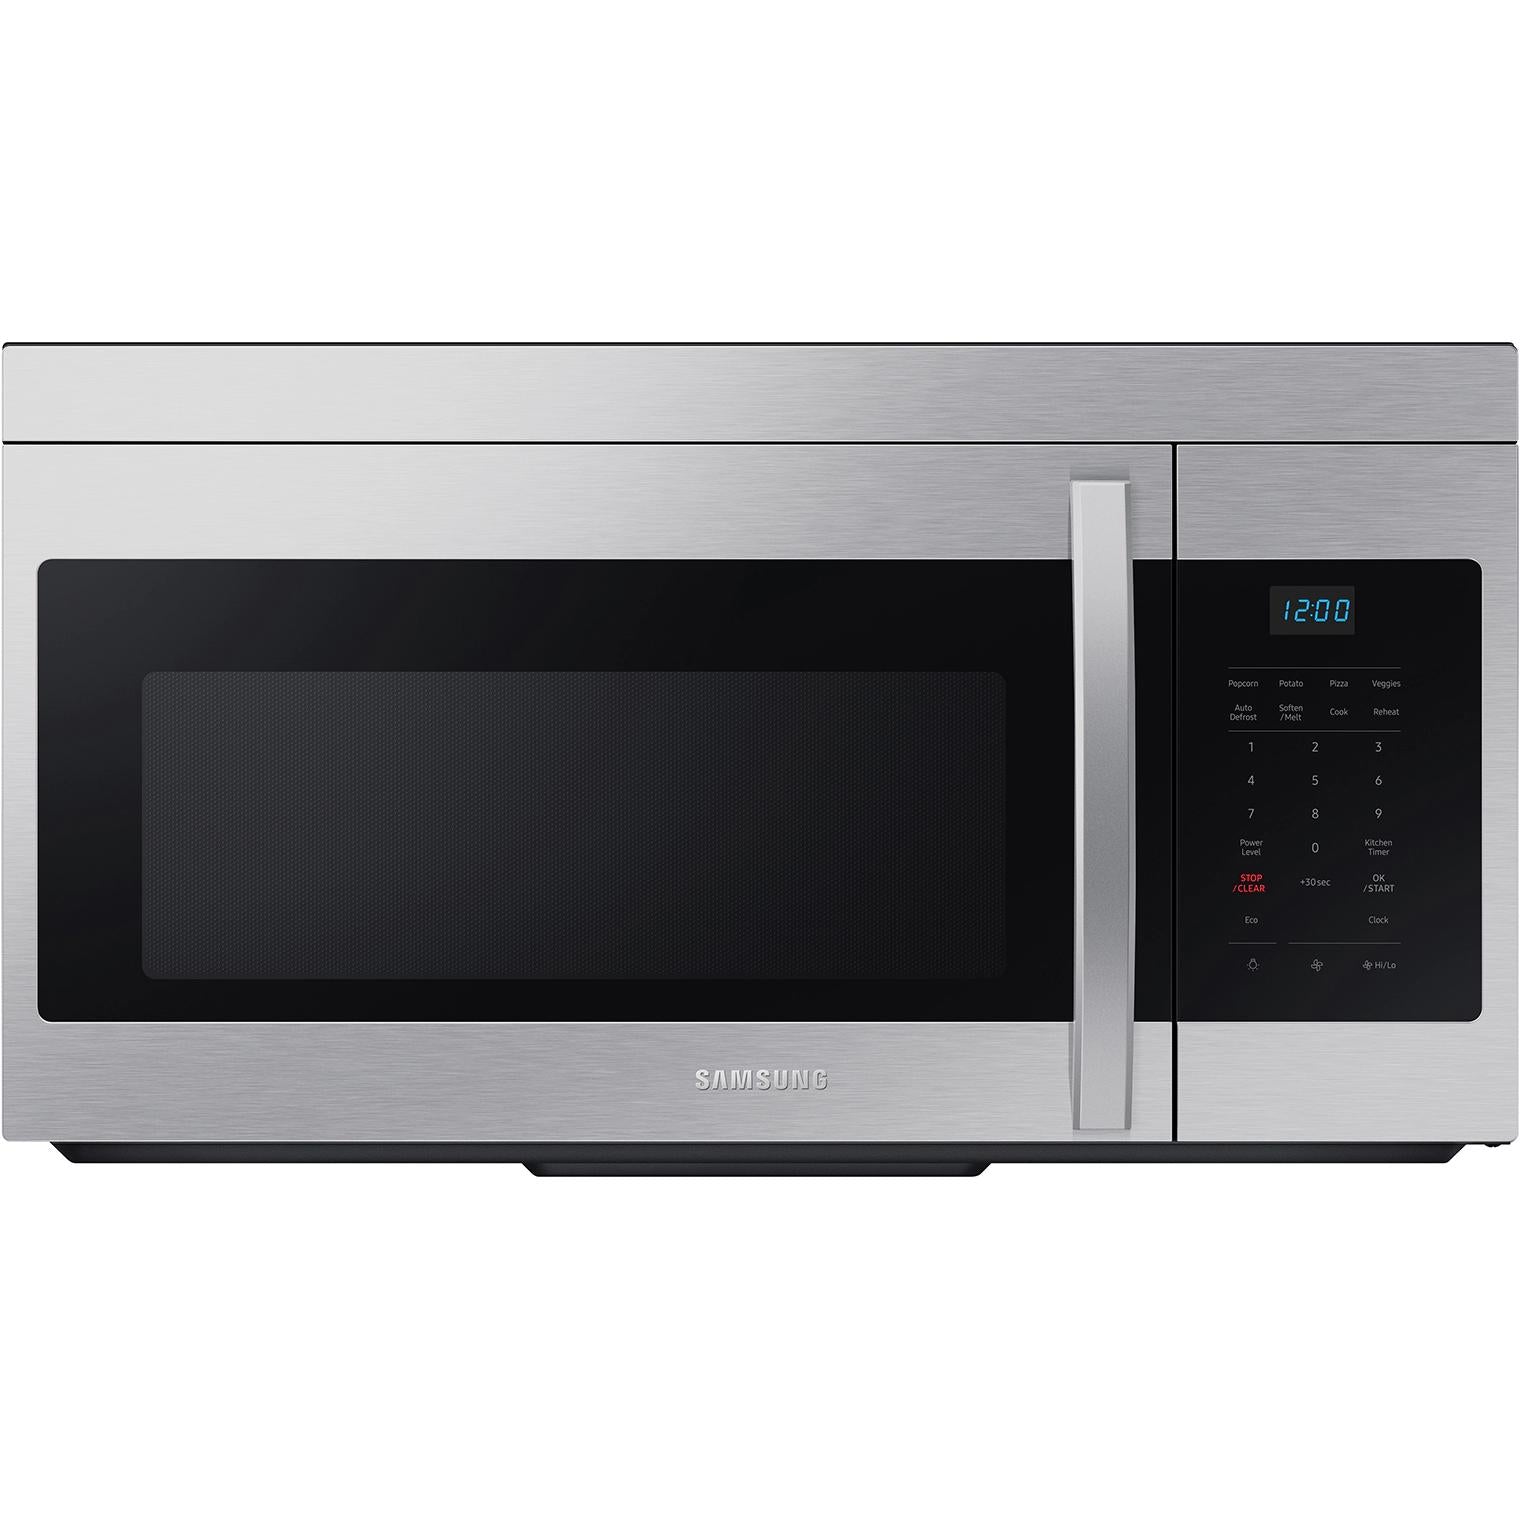 Samsung 30-inch, 1.6 cu.ft. Over-the-Range Microwave Oven with LED Display ME16A4021AS/AA